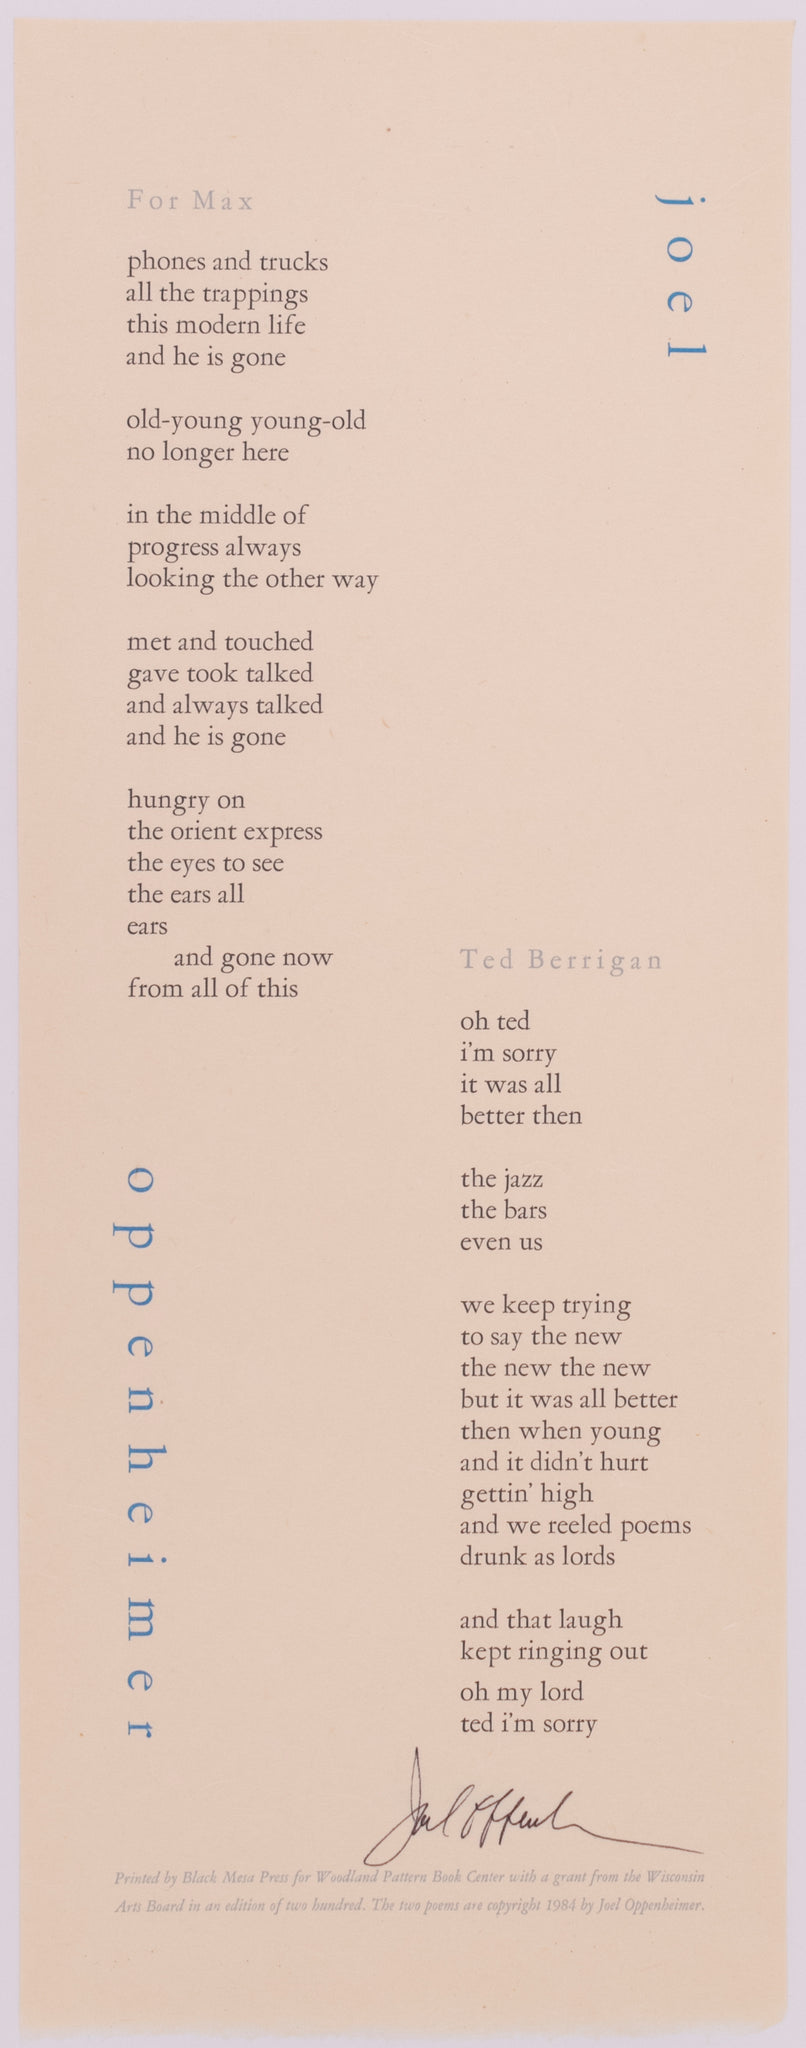 This broadside was done for Joel Oppenheimer and the poems on it are called For Max and Ted Berrigan. It is on cream paper in black and blue text.